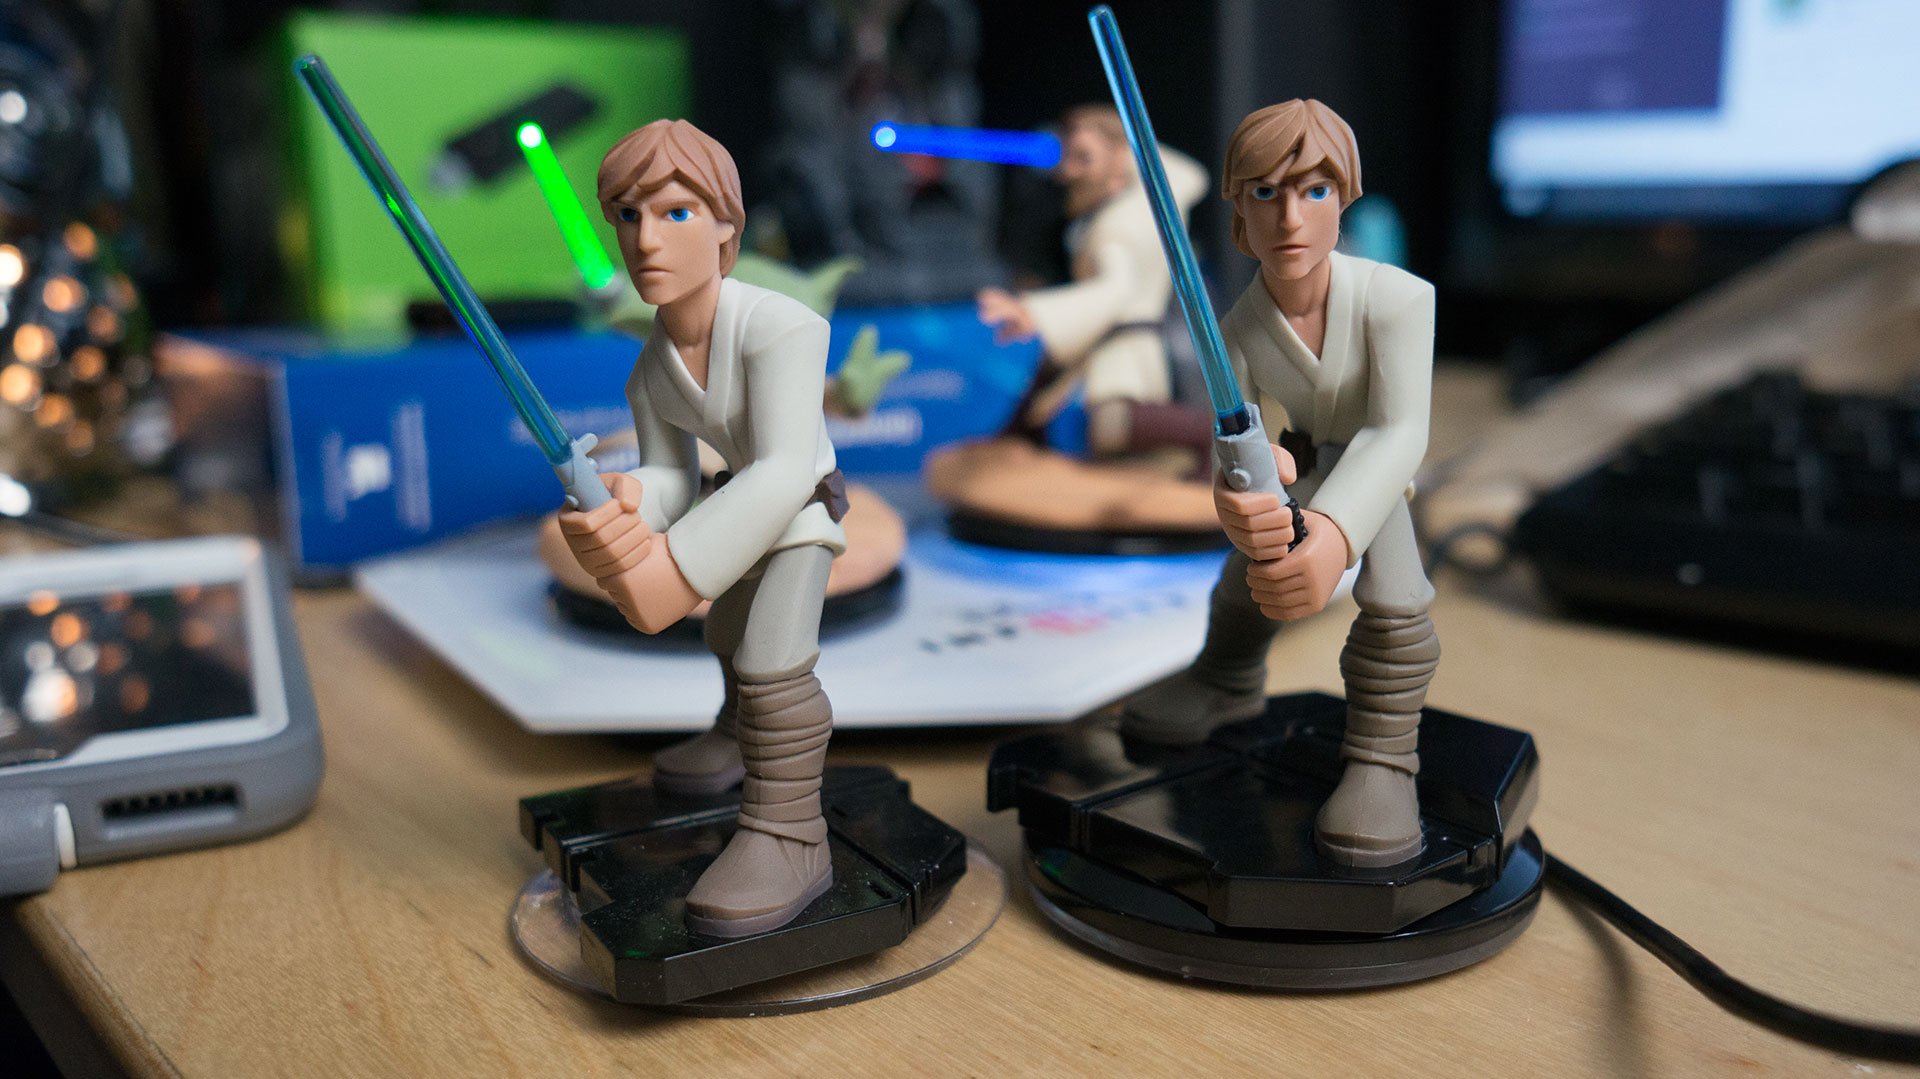 Disney Releases The Coolest Star Wars Infinity Figures In The Most Annoying Way Possible